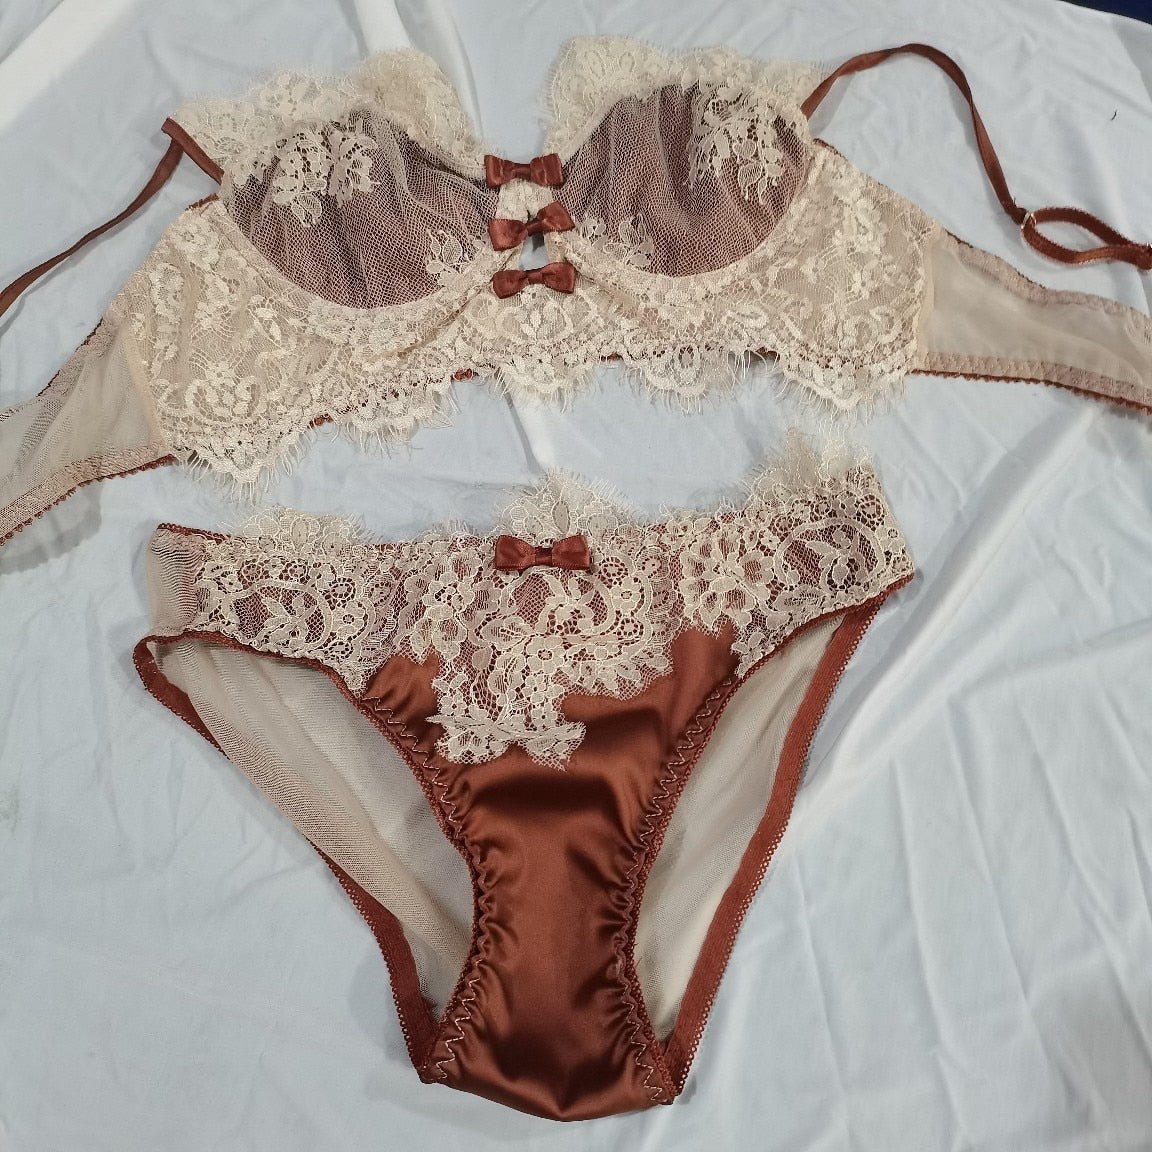 Big Easy- the Lace Bra and Open Gusset Panty Set – Dorothea's Closet Vintage